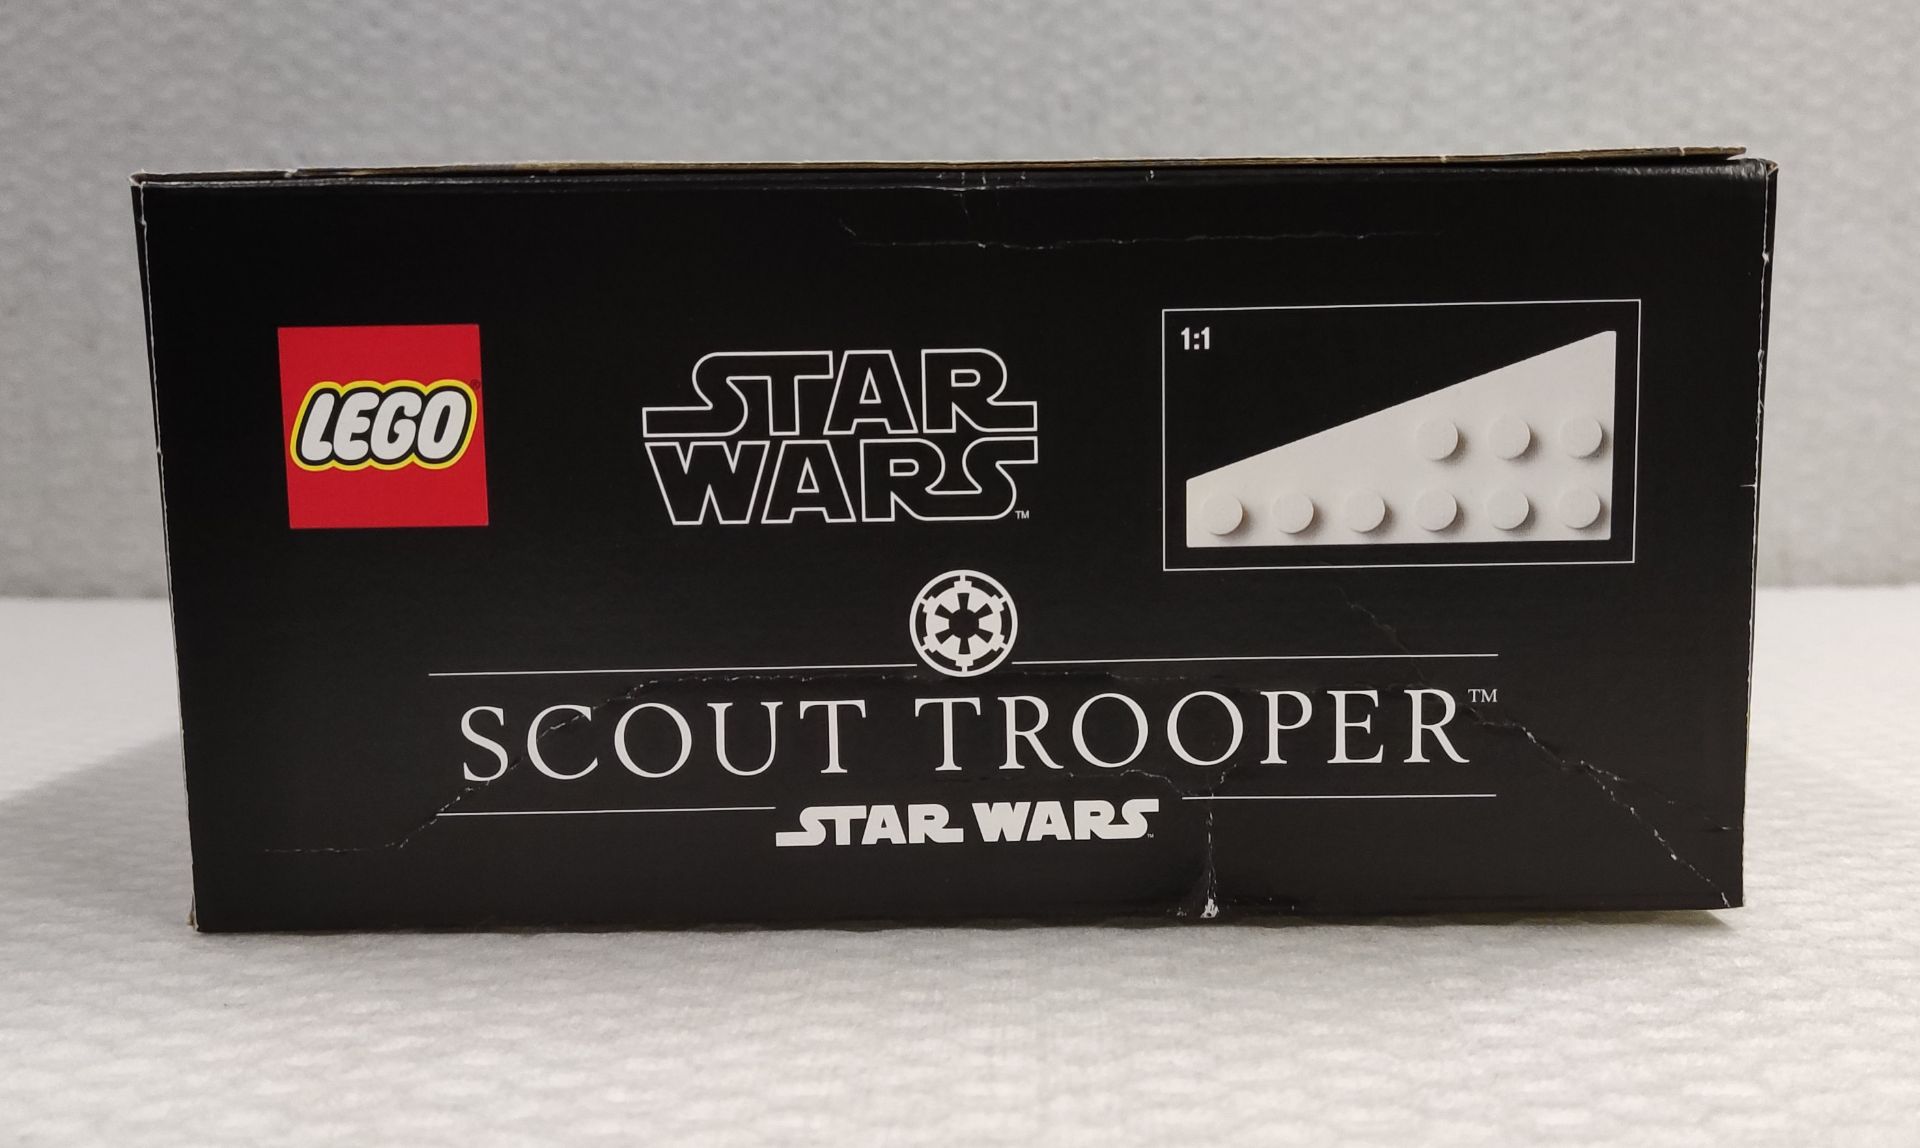 1 x Lego Star Wars Scout Trooper Helmet - Model 75305 - New/Boxed - Image 6 of 7